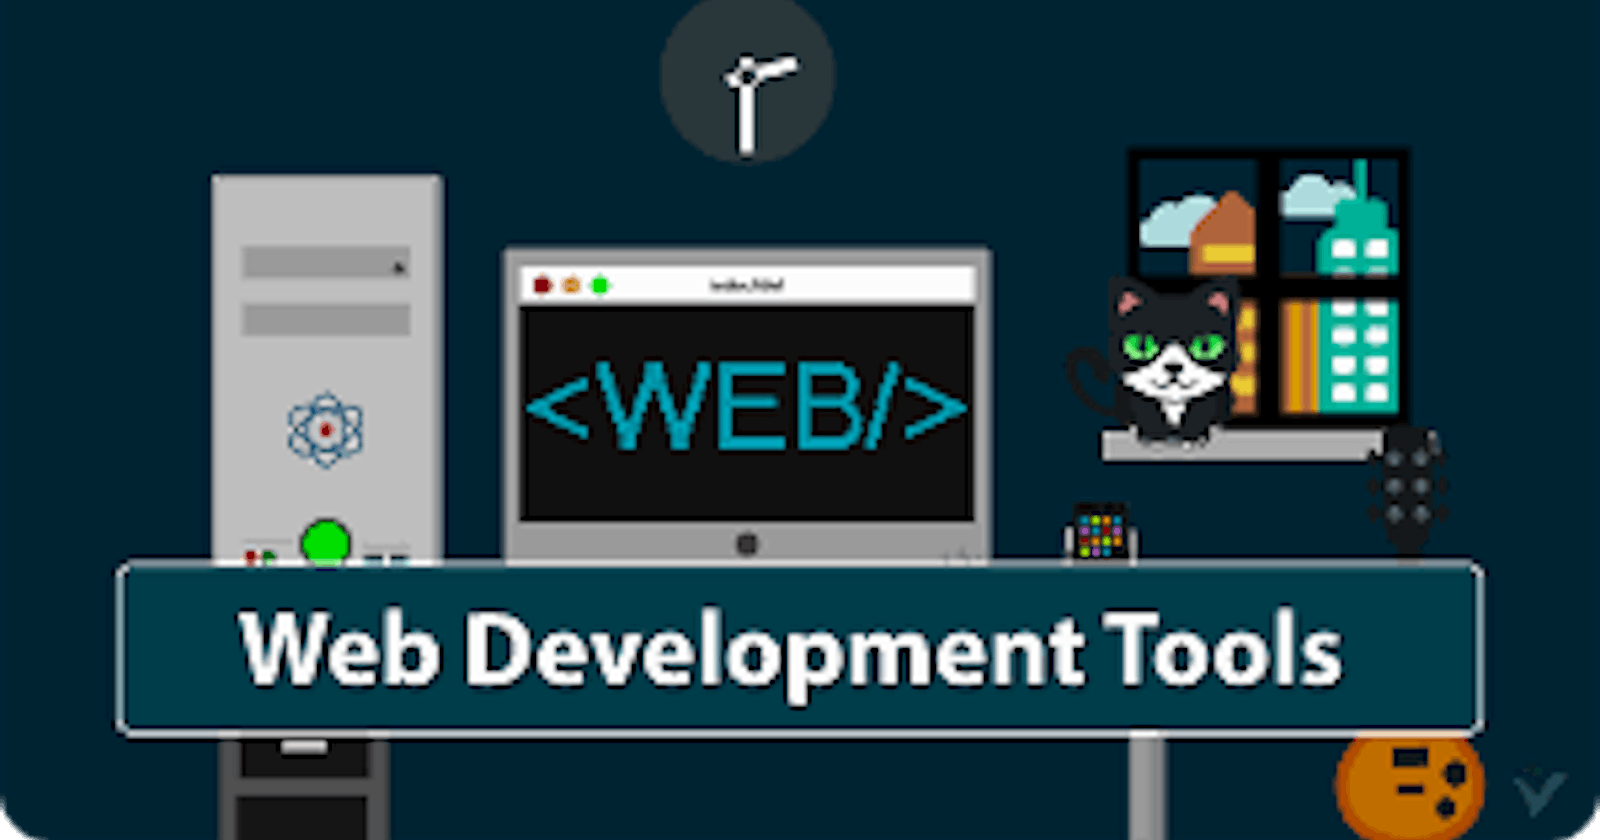 I gathered a few developer stuff Must-know tools for web developers